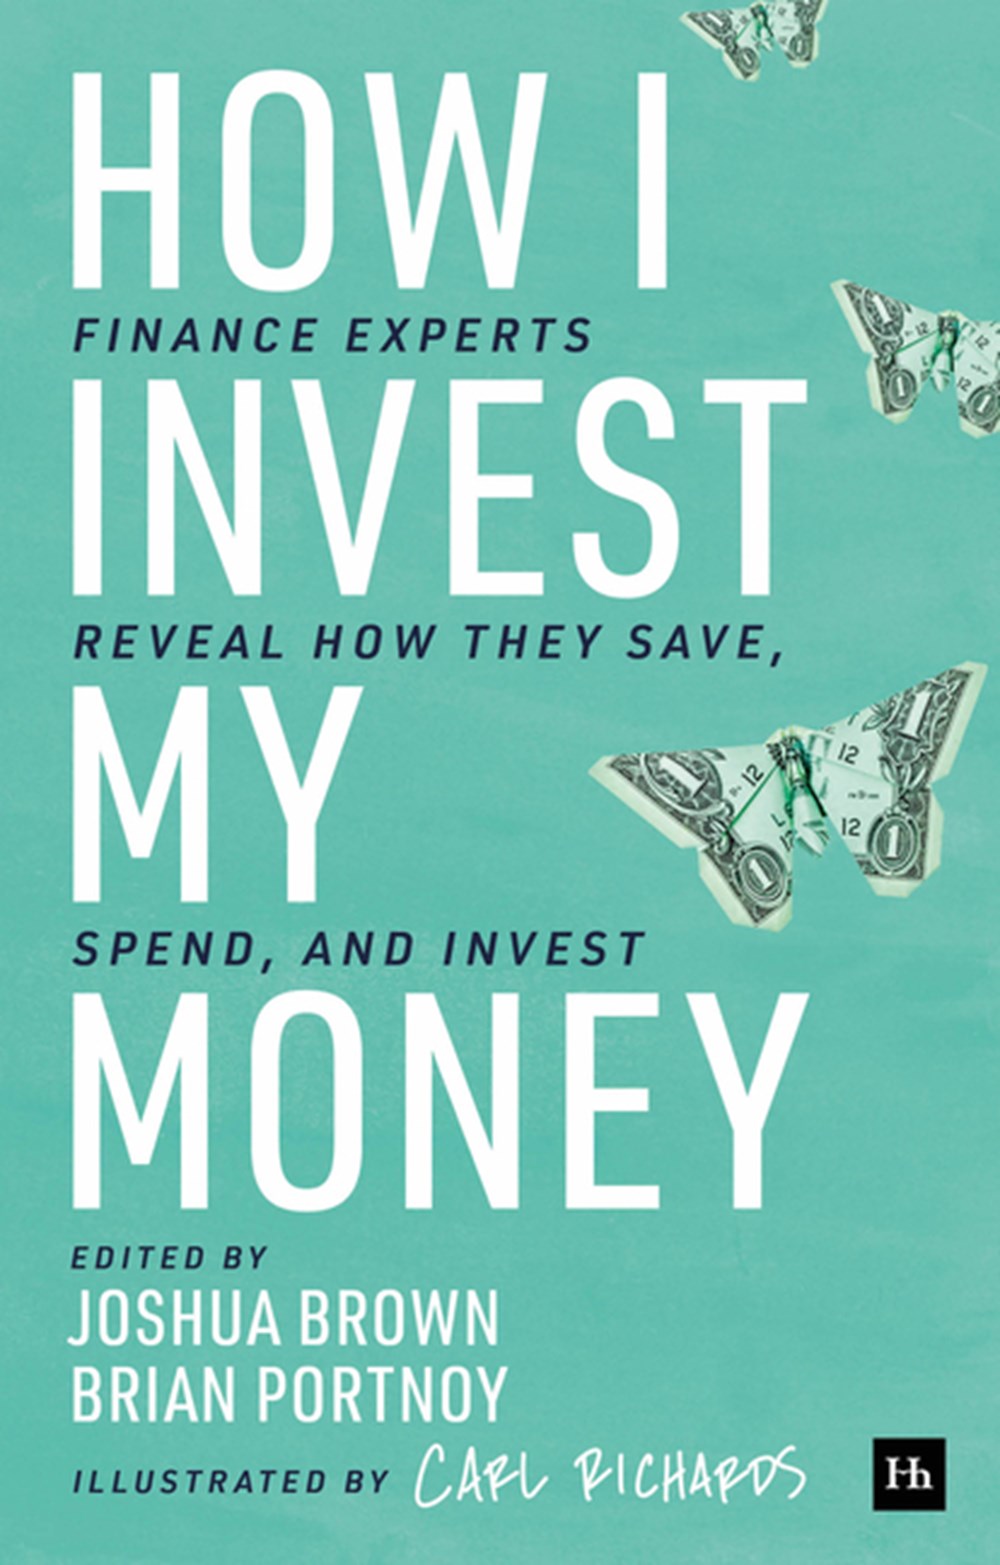 How I Invest My Money Finance Experts Reveal How They Save, Spend, and Invest